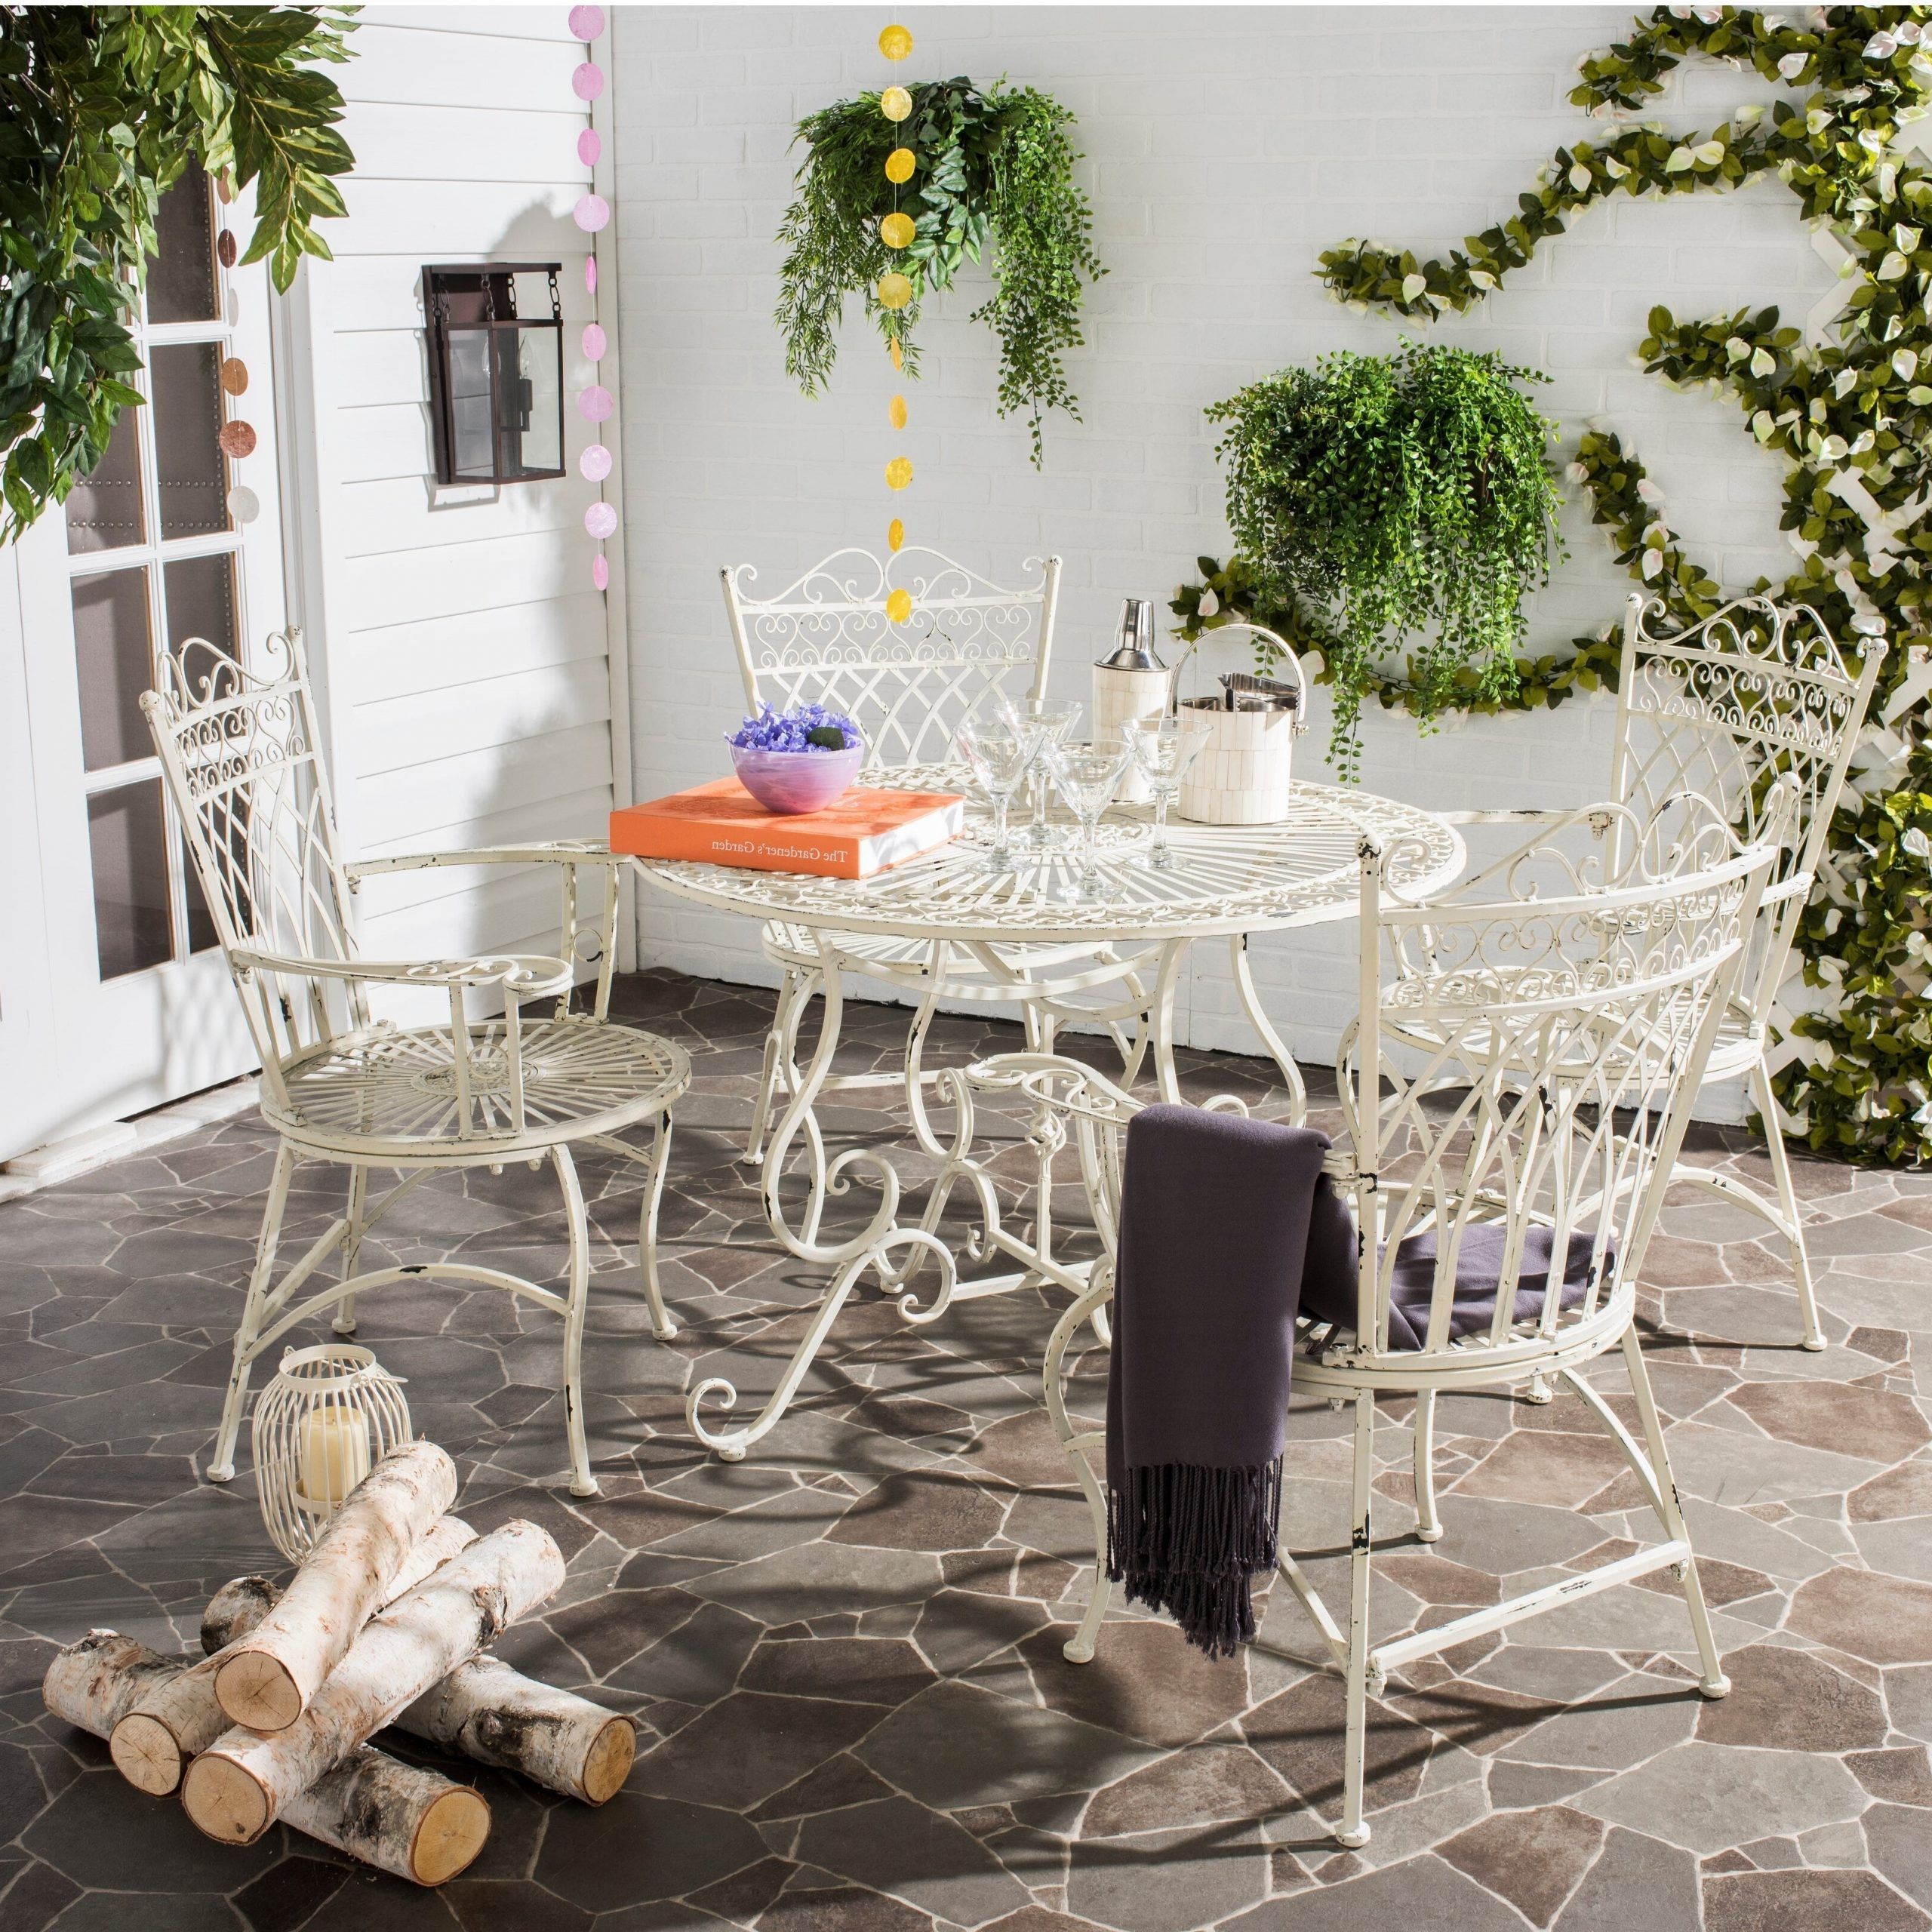 Reclaimed Vintage Outdoor Tables Intended For Well Liked Vintage Wrought Iron Patio Furniture – Ideas On Foter (View 2 of 15)